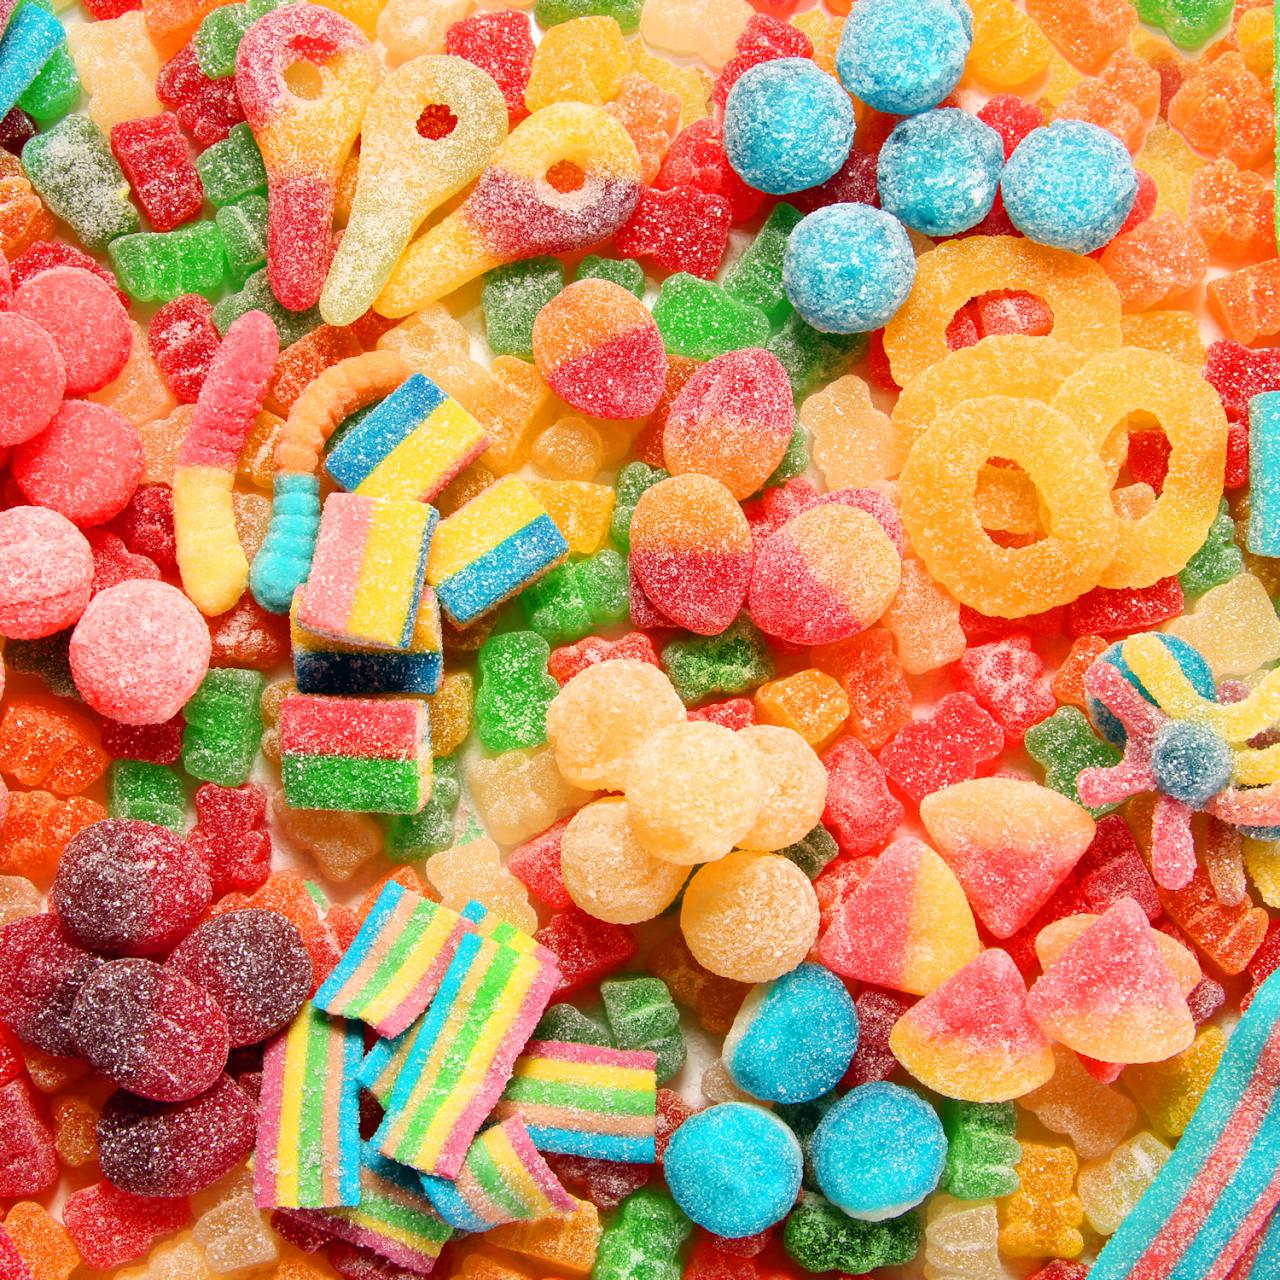 The trouble with sweets, lollies and candies